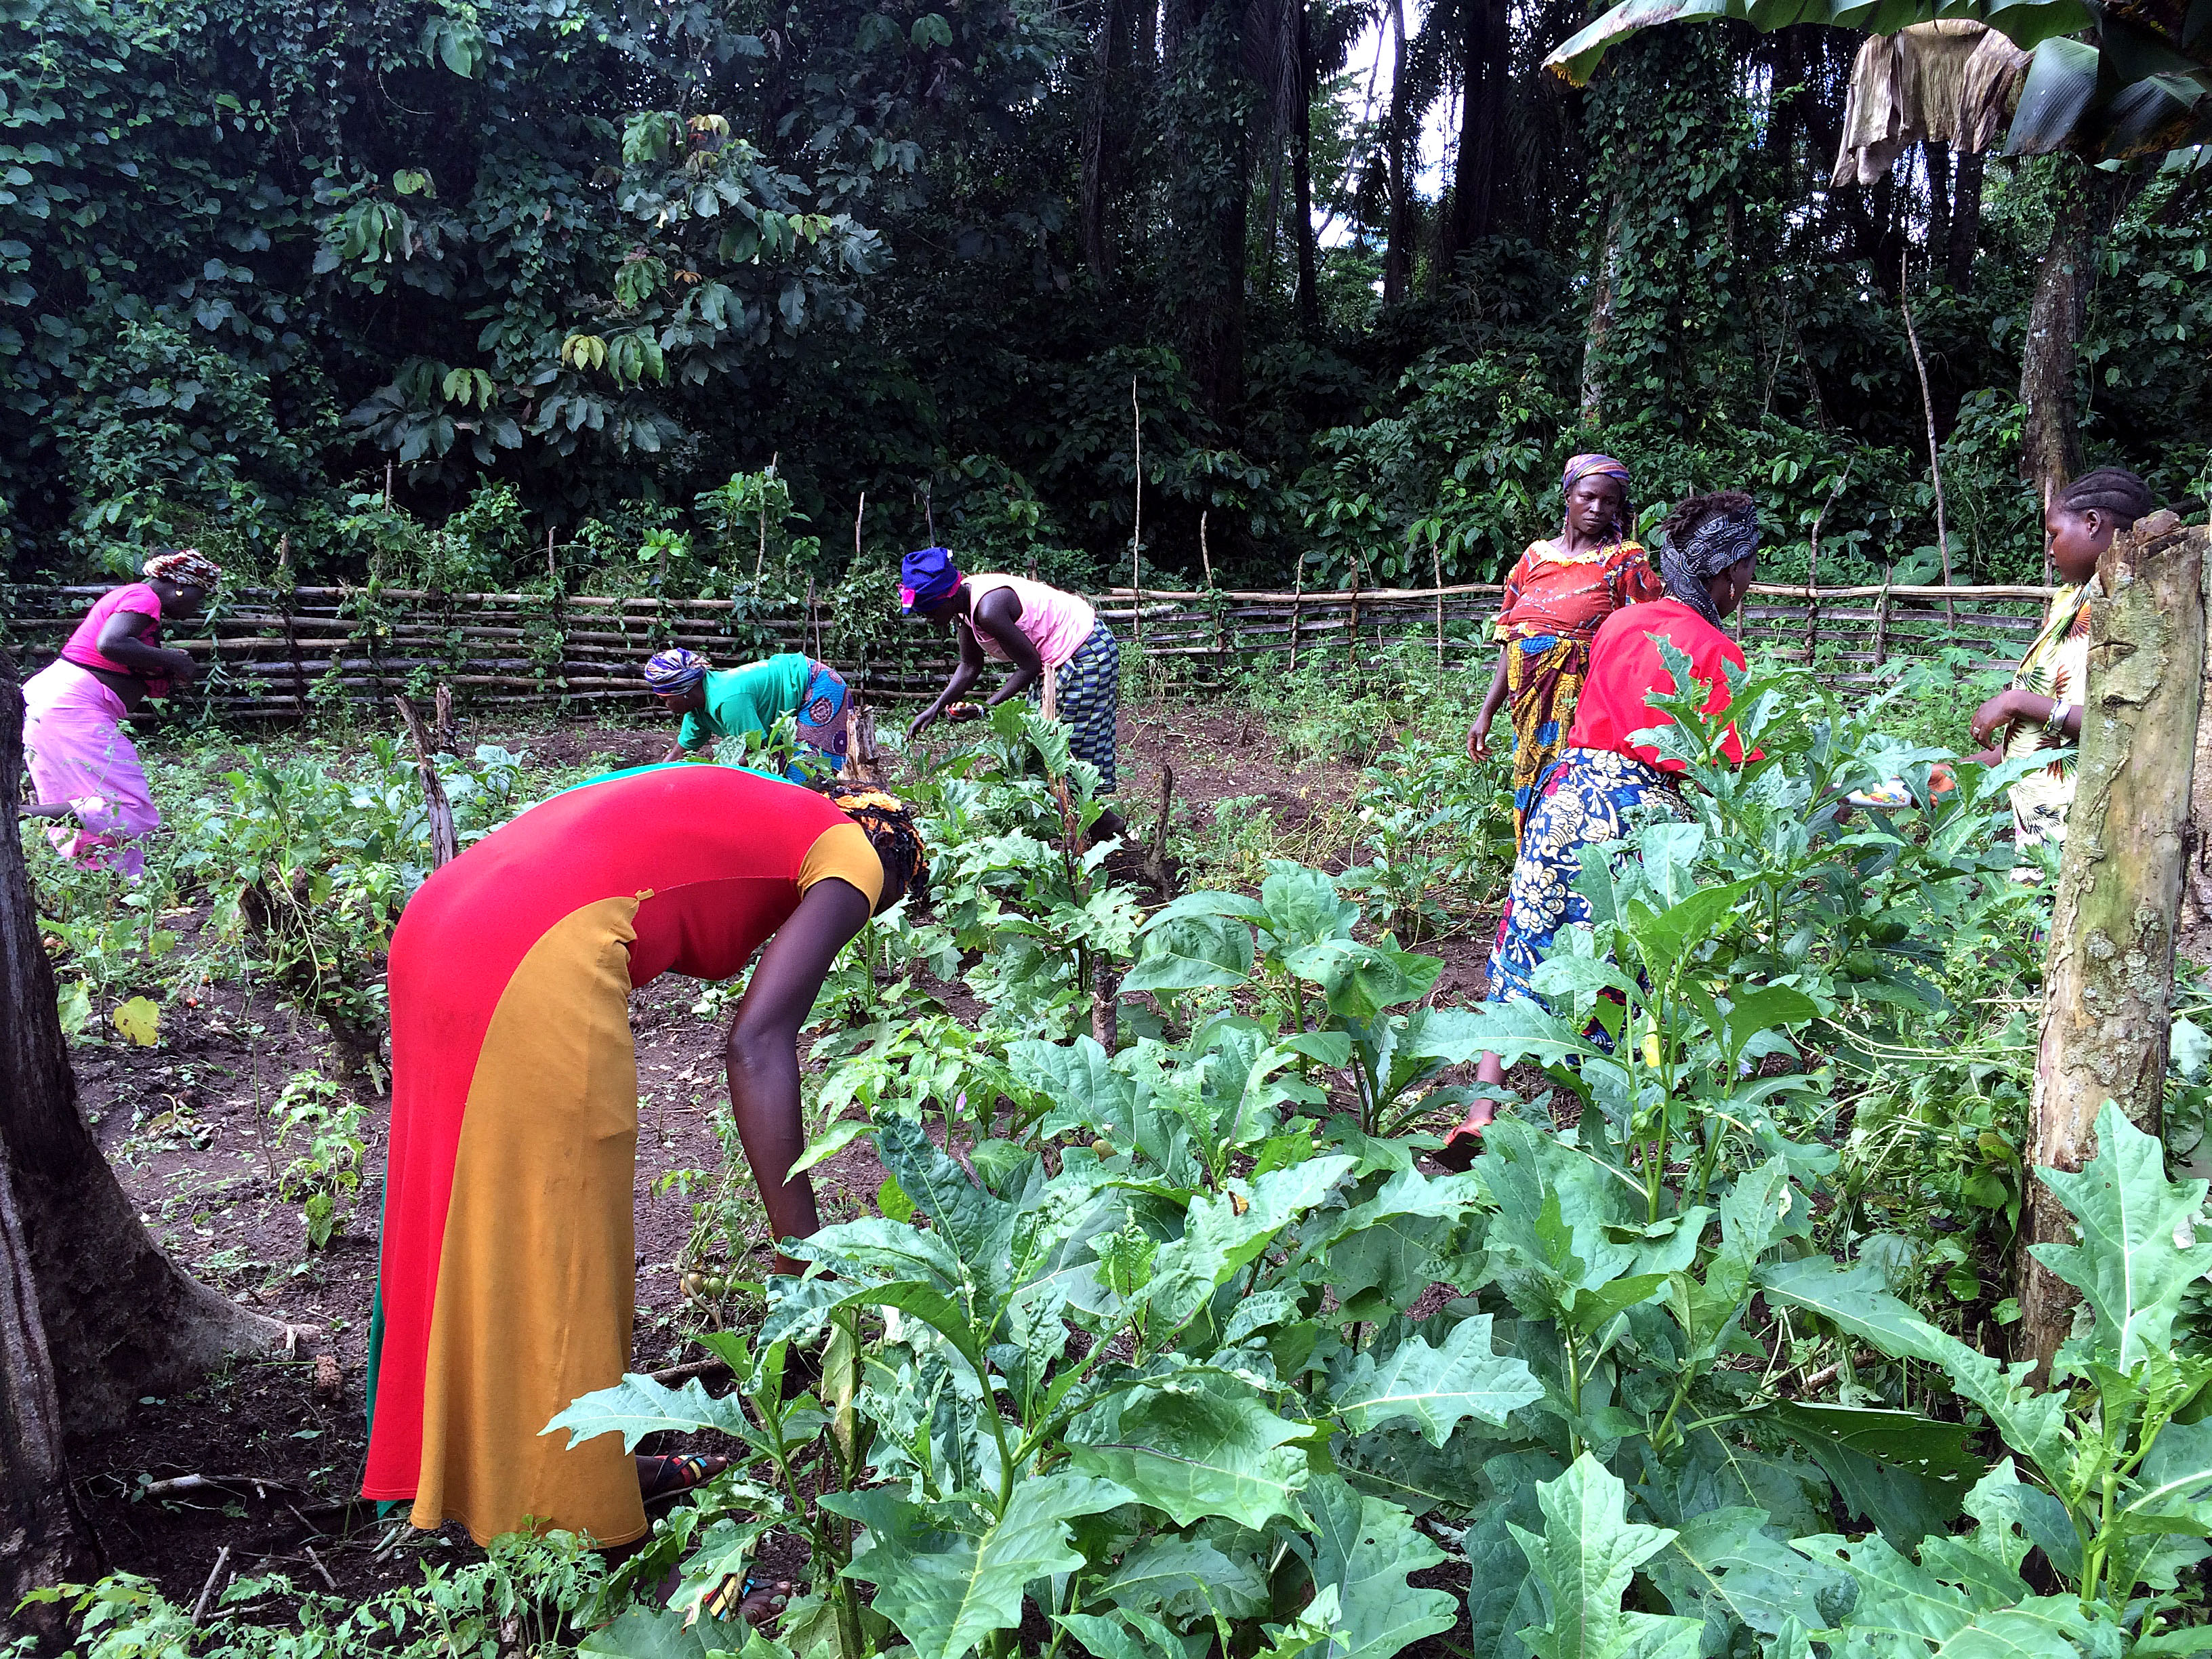 NGO-supported community gardens, like this one, can serve as a potential source of nutrient-rich food.